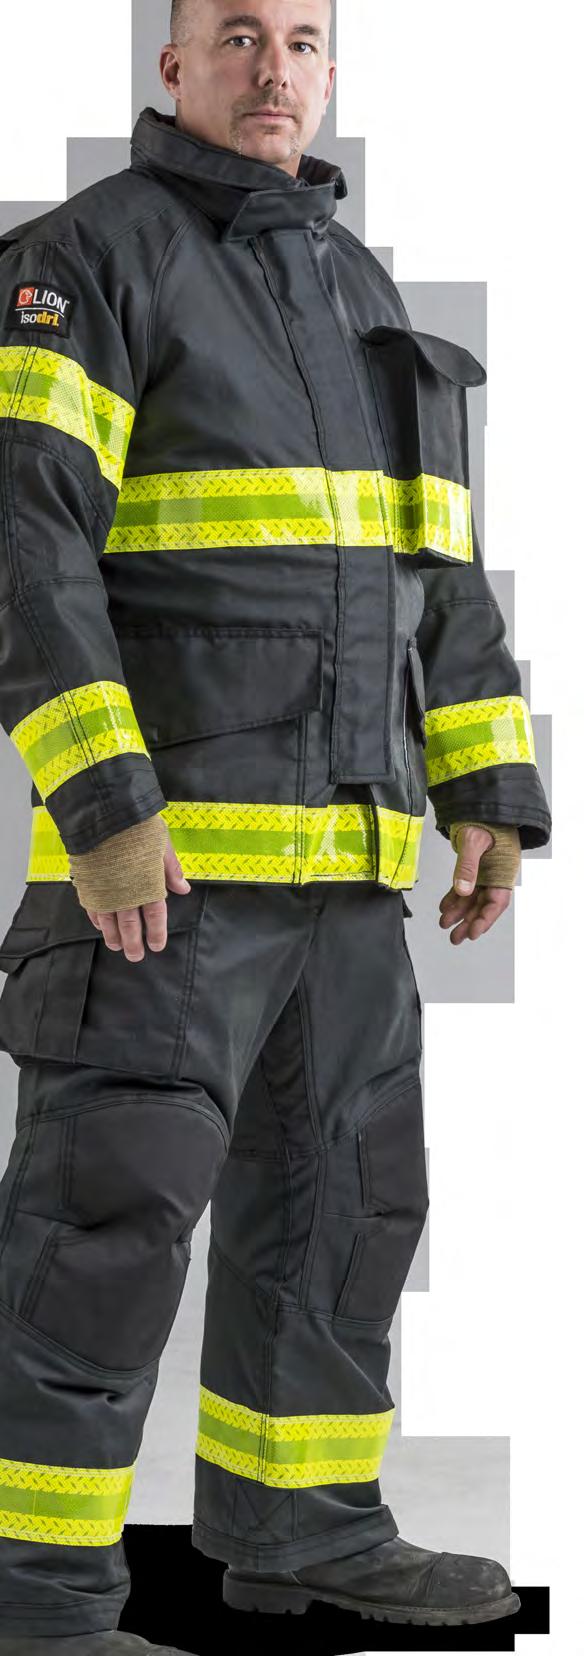 Professional sport and military technology combine to create turnout gear that provides the mobility and comfort to do your job every day with the toughness and durability you expect from